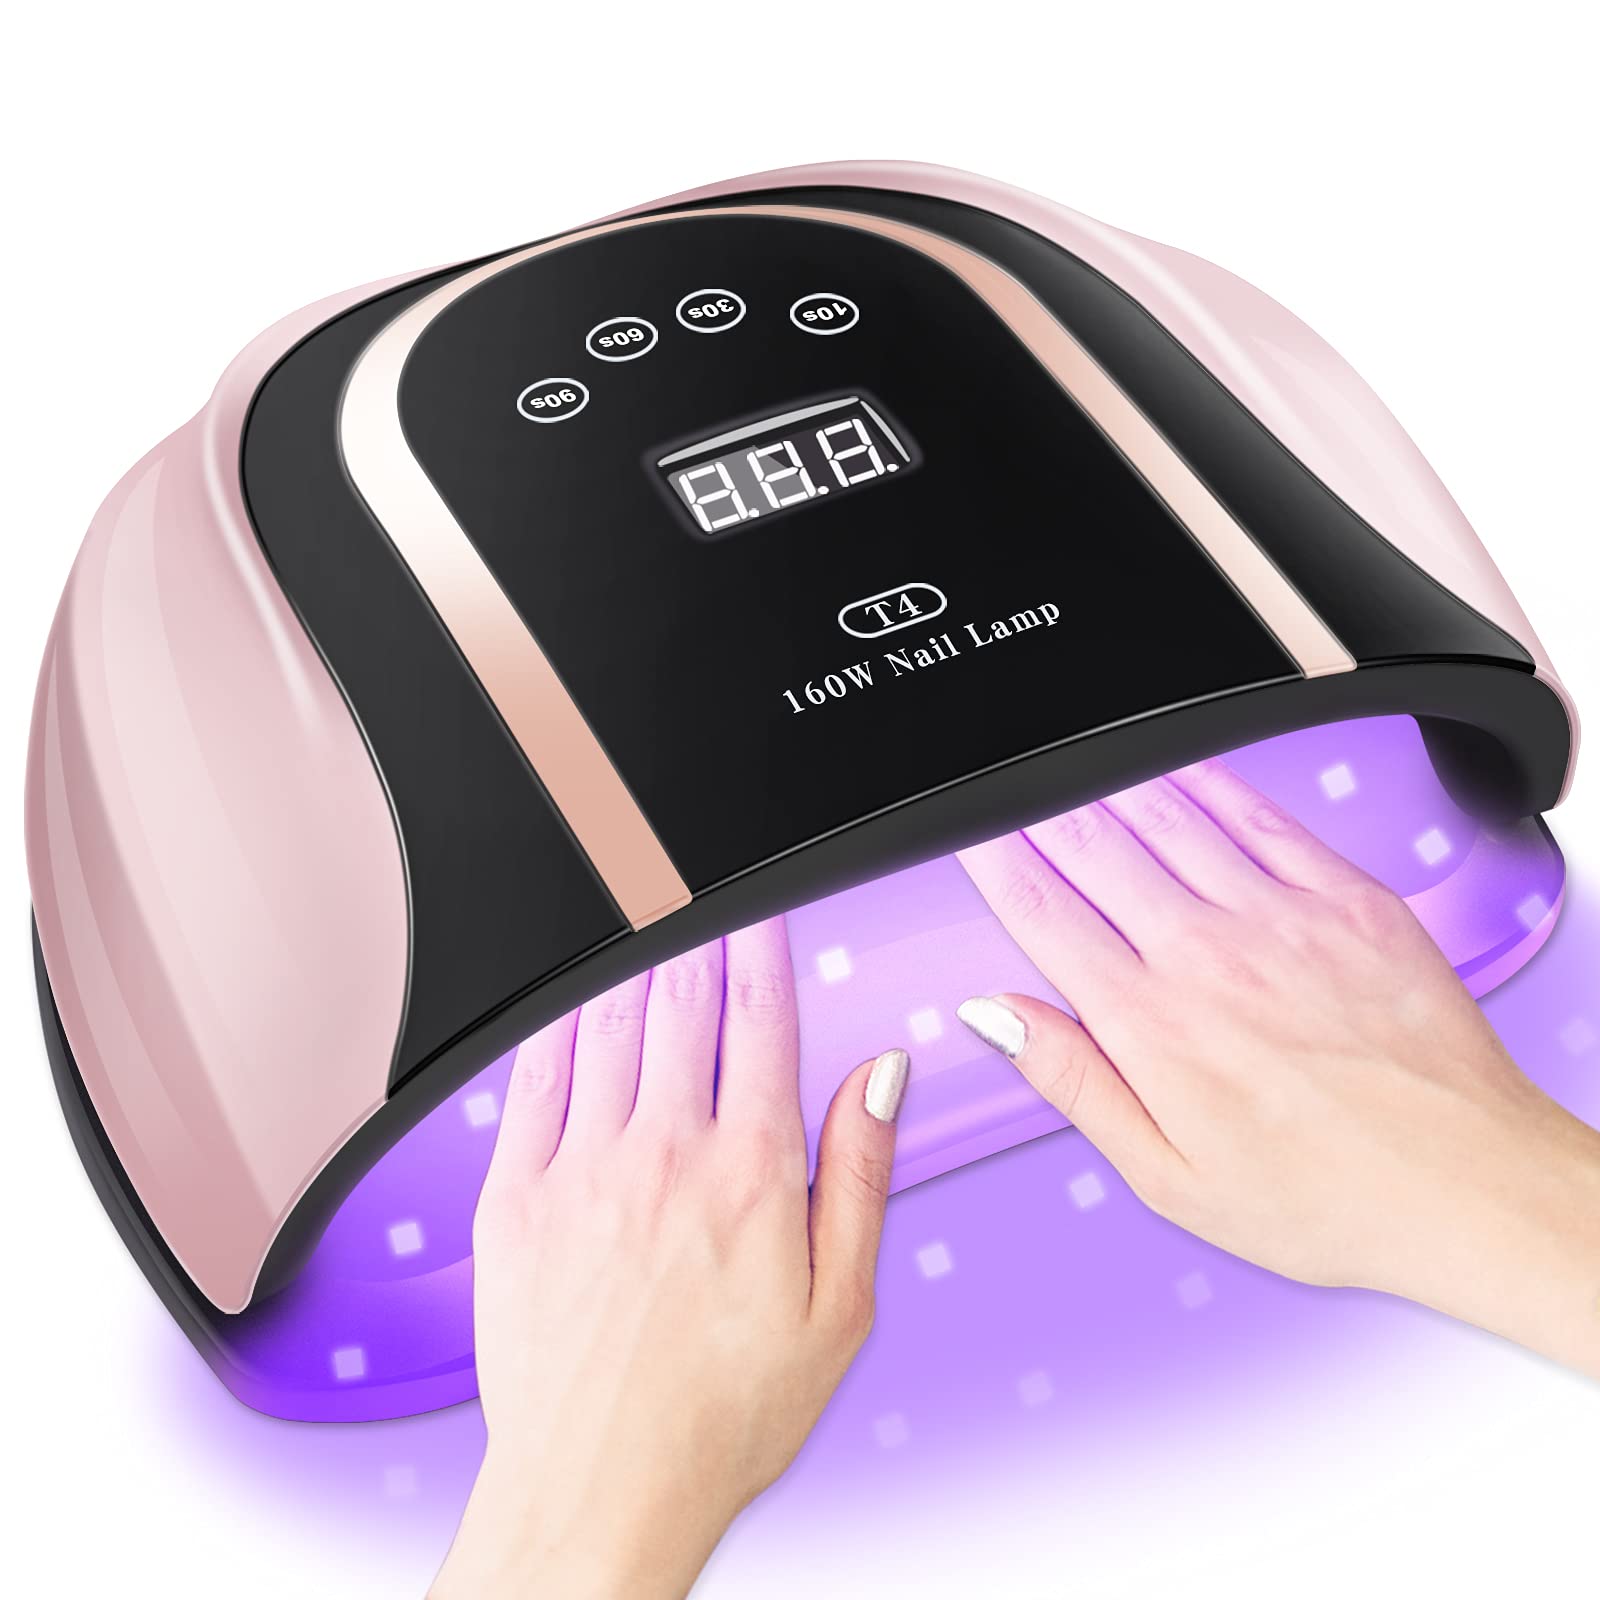 160W UV LED Gel Nail Lamp,Large UV Nail Light for Professional Salon Home  Two Hand Use,Gel Polish Curing Lamp Nail Dryer with 54 PCS Light Bead (Pink)